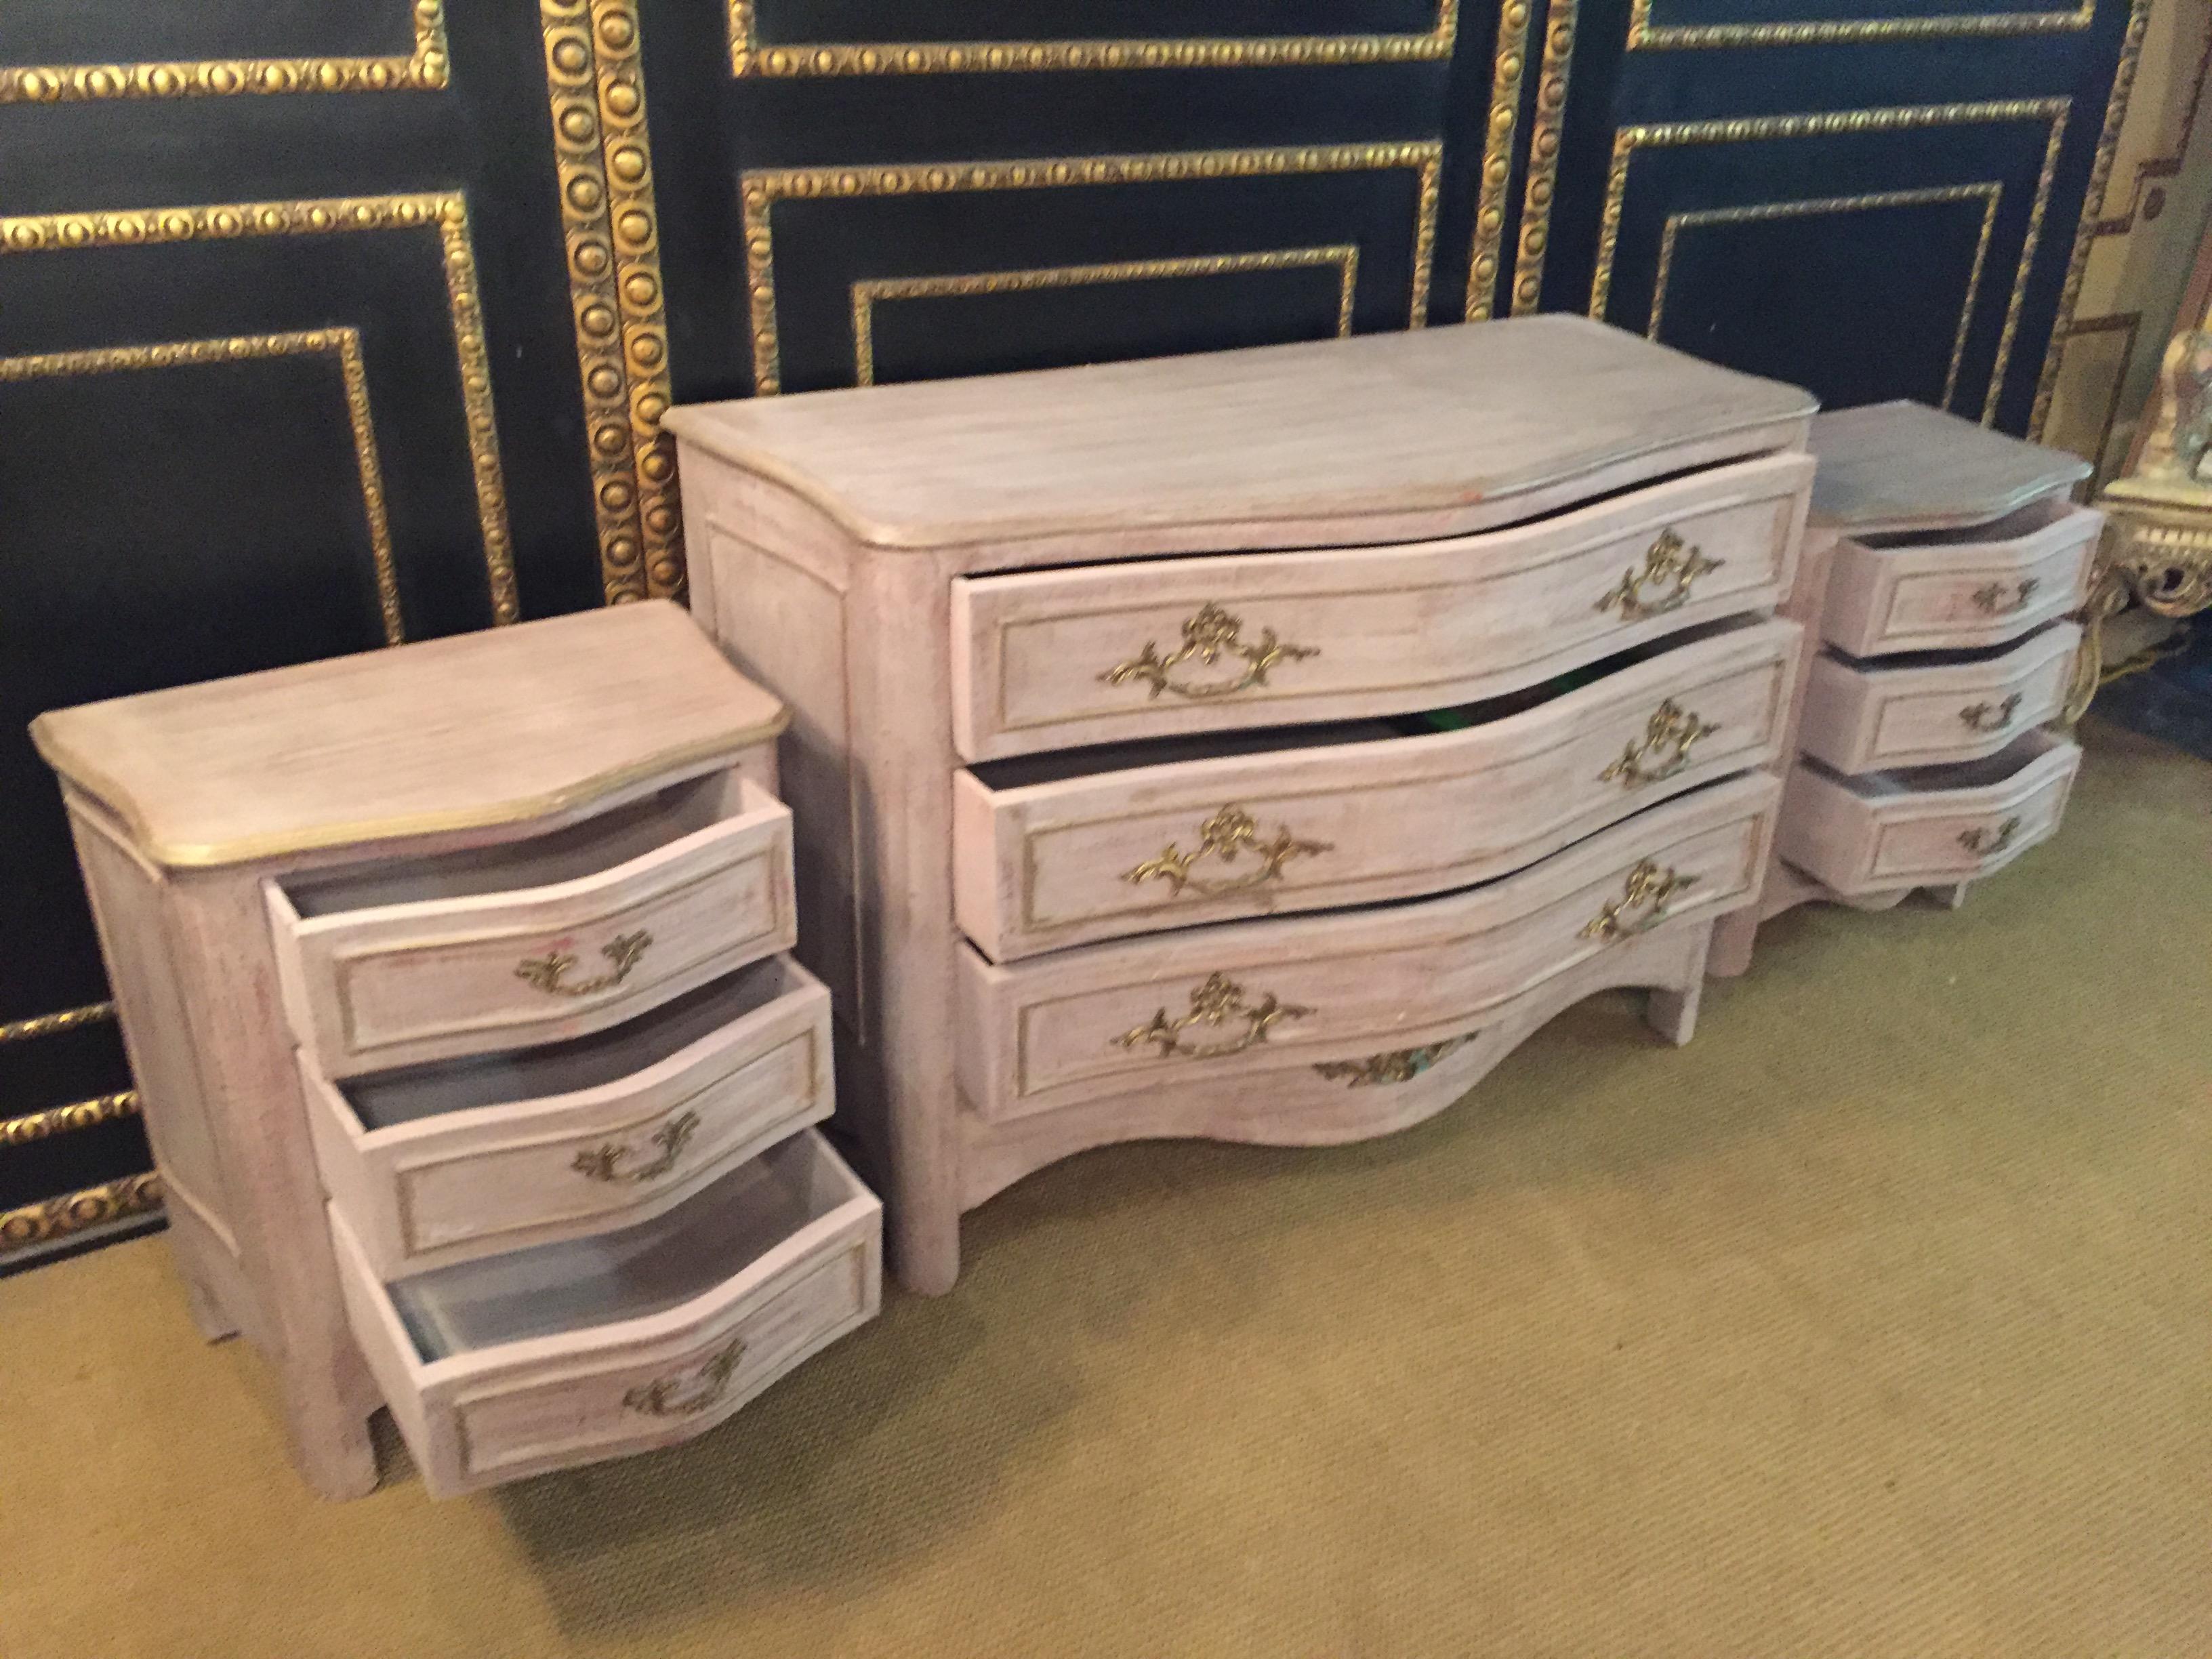 20th Century Beautiful Country Style Baroque Chest of Drawers in the Style of 18th Century